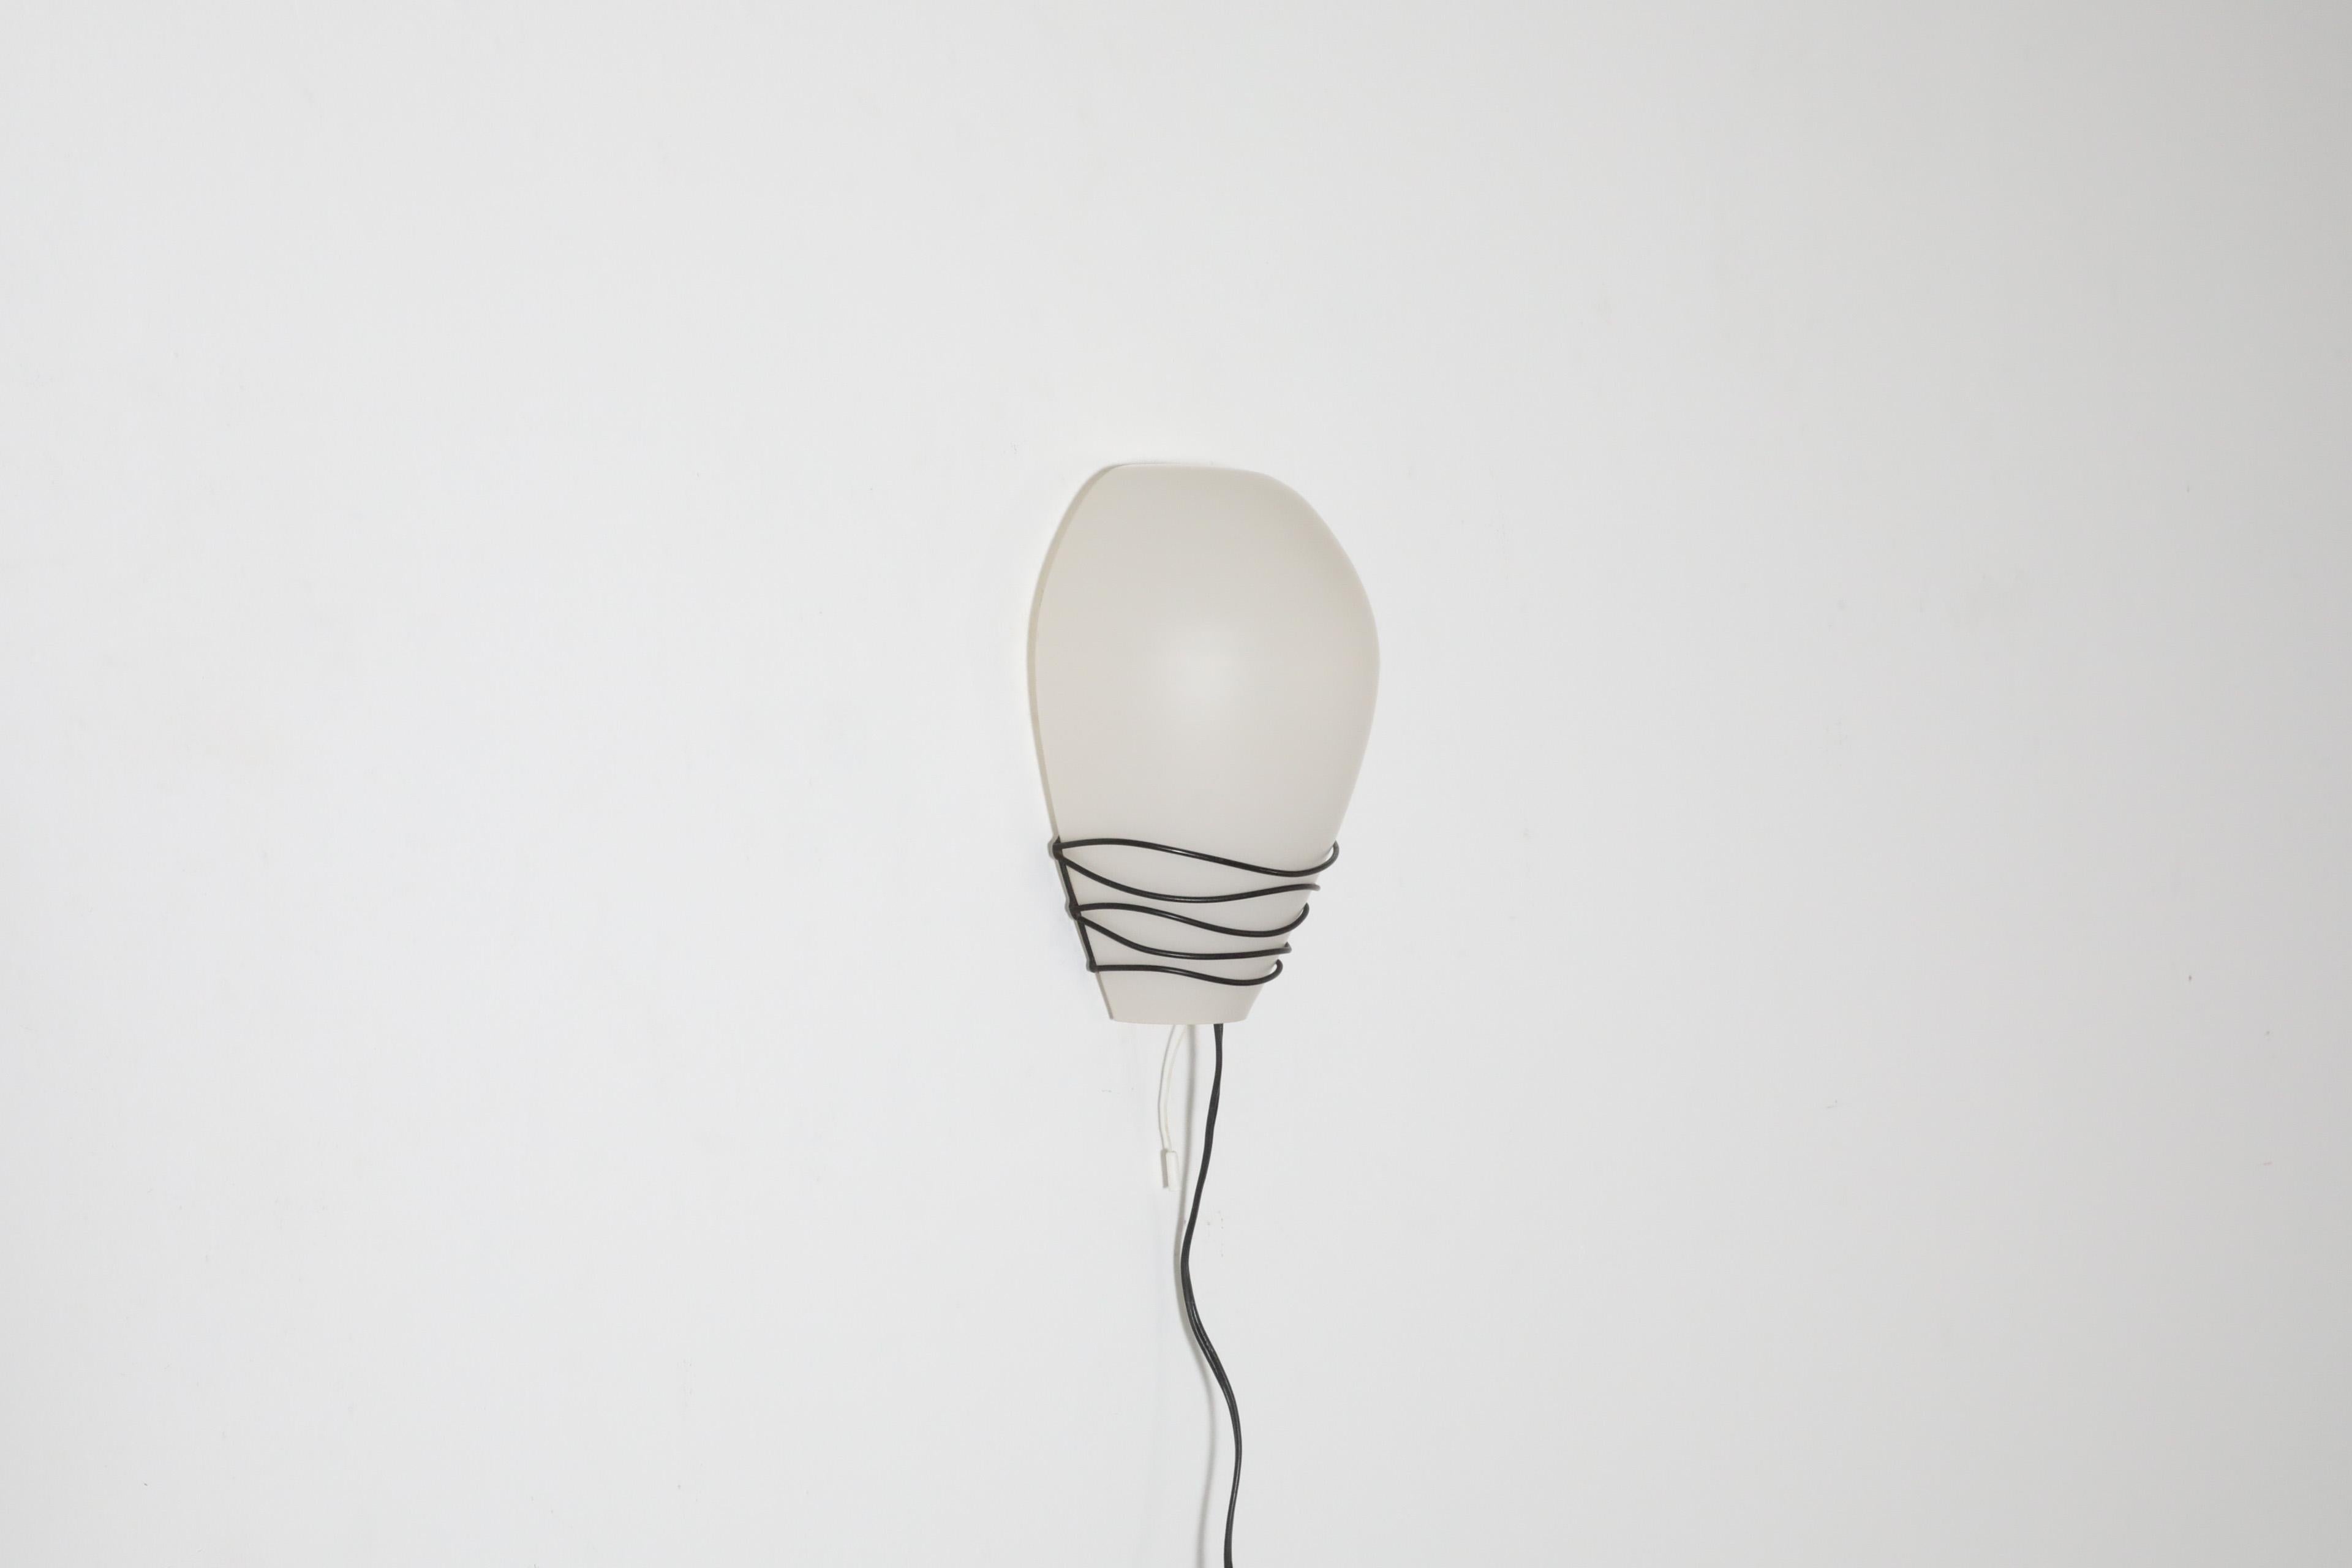 Mid-20th Century Philips Milk Glass Wall Sconce w/ Black Wire Mount and Milk Glass Shade, 1950's For Sale